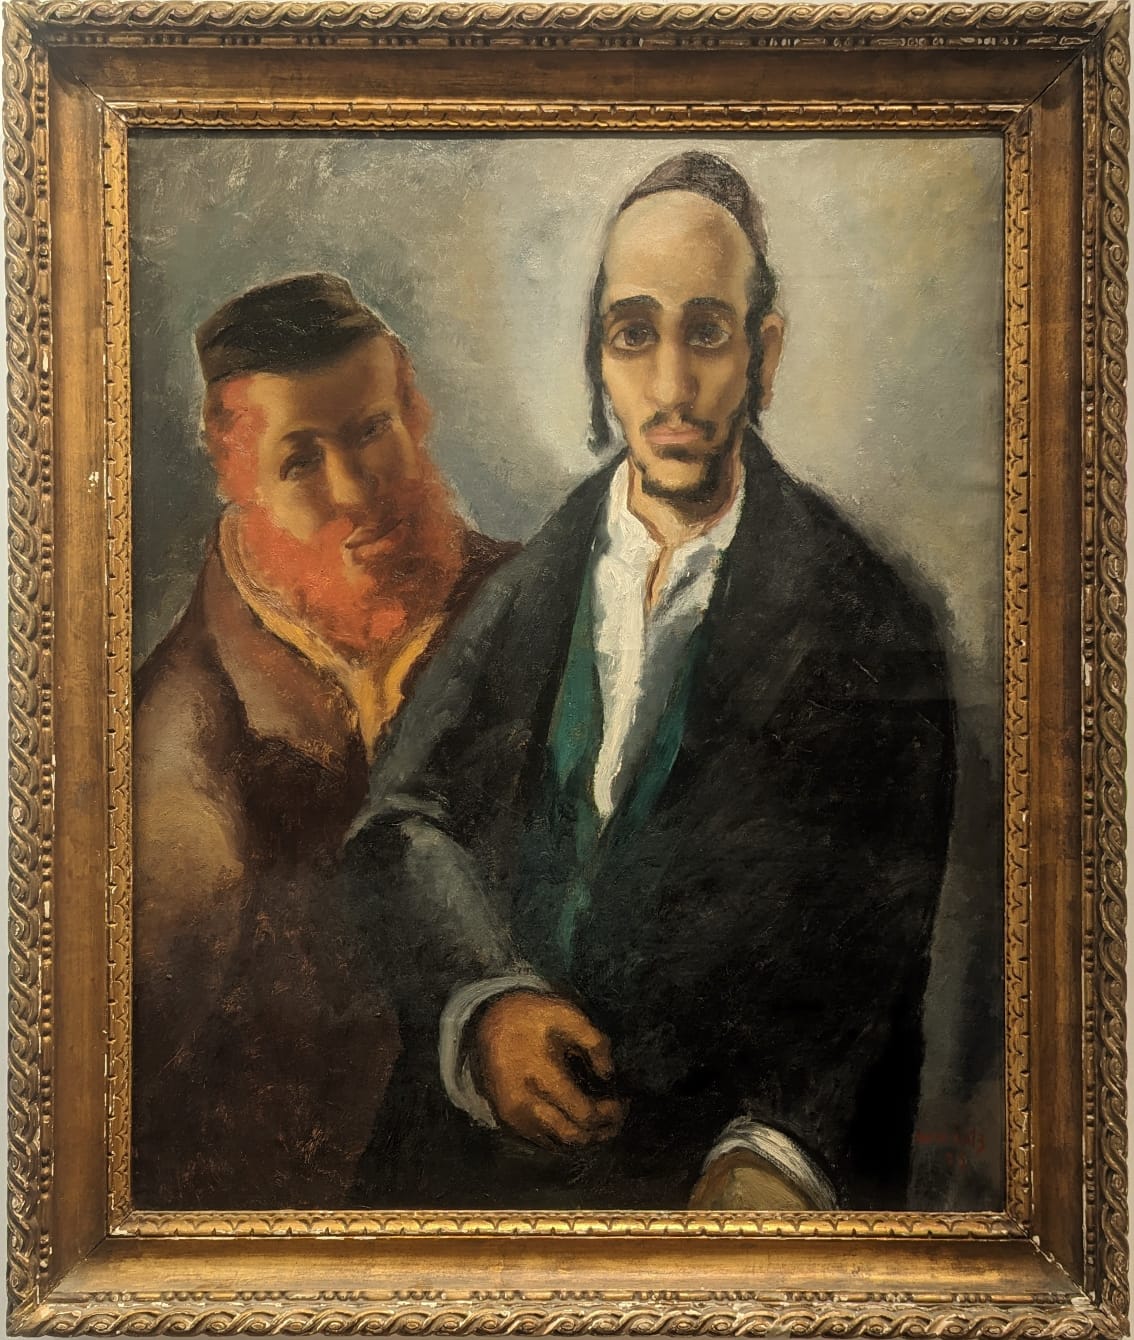 Mane Katz - Two Hassids - Oil on canvas - 117x98 cm